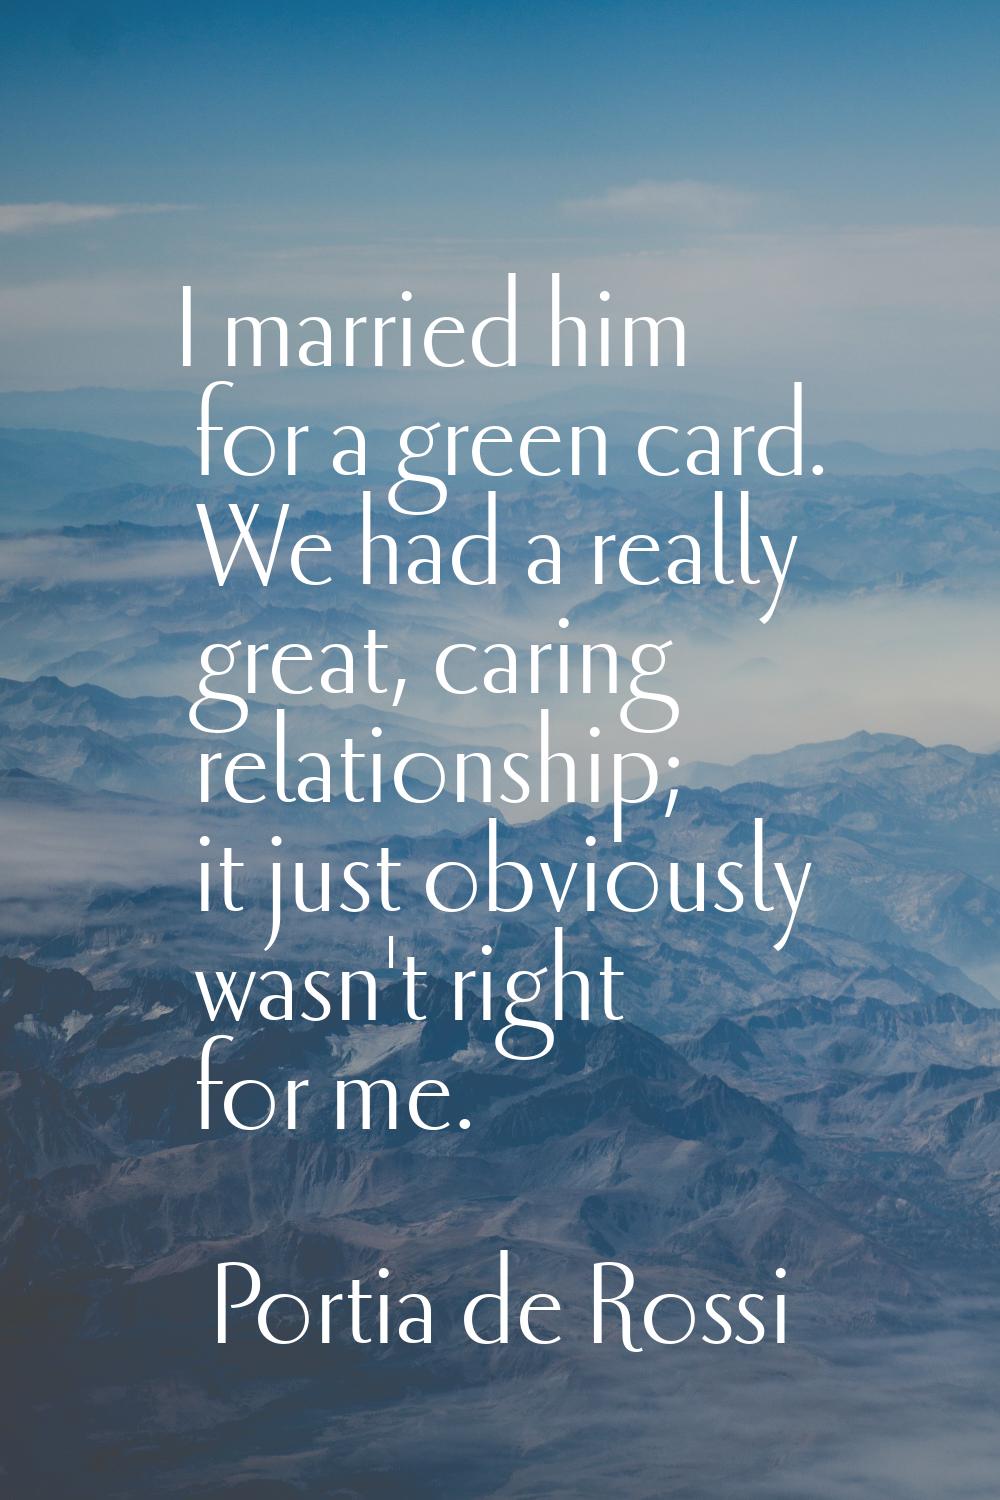 I married him for a green card. We had a really great, caring relationship; it just obviously wasn'